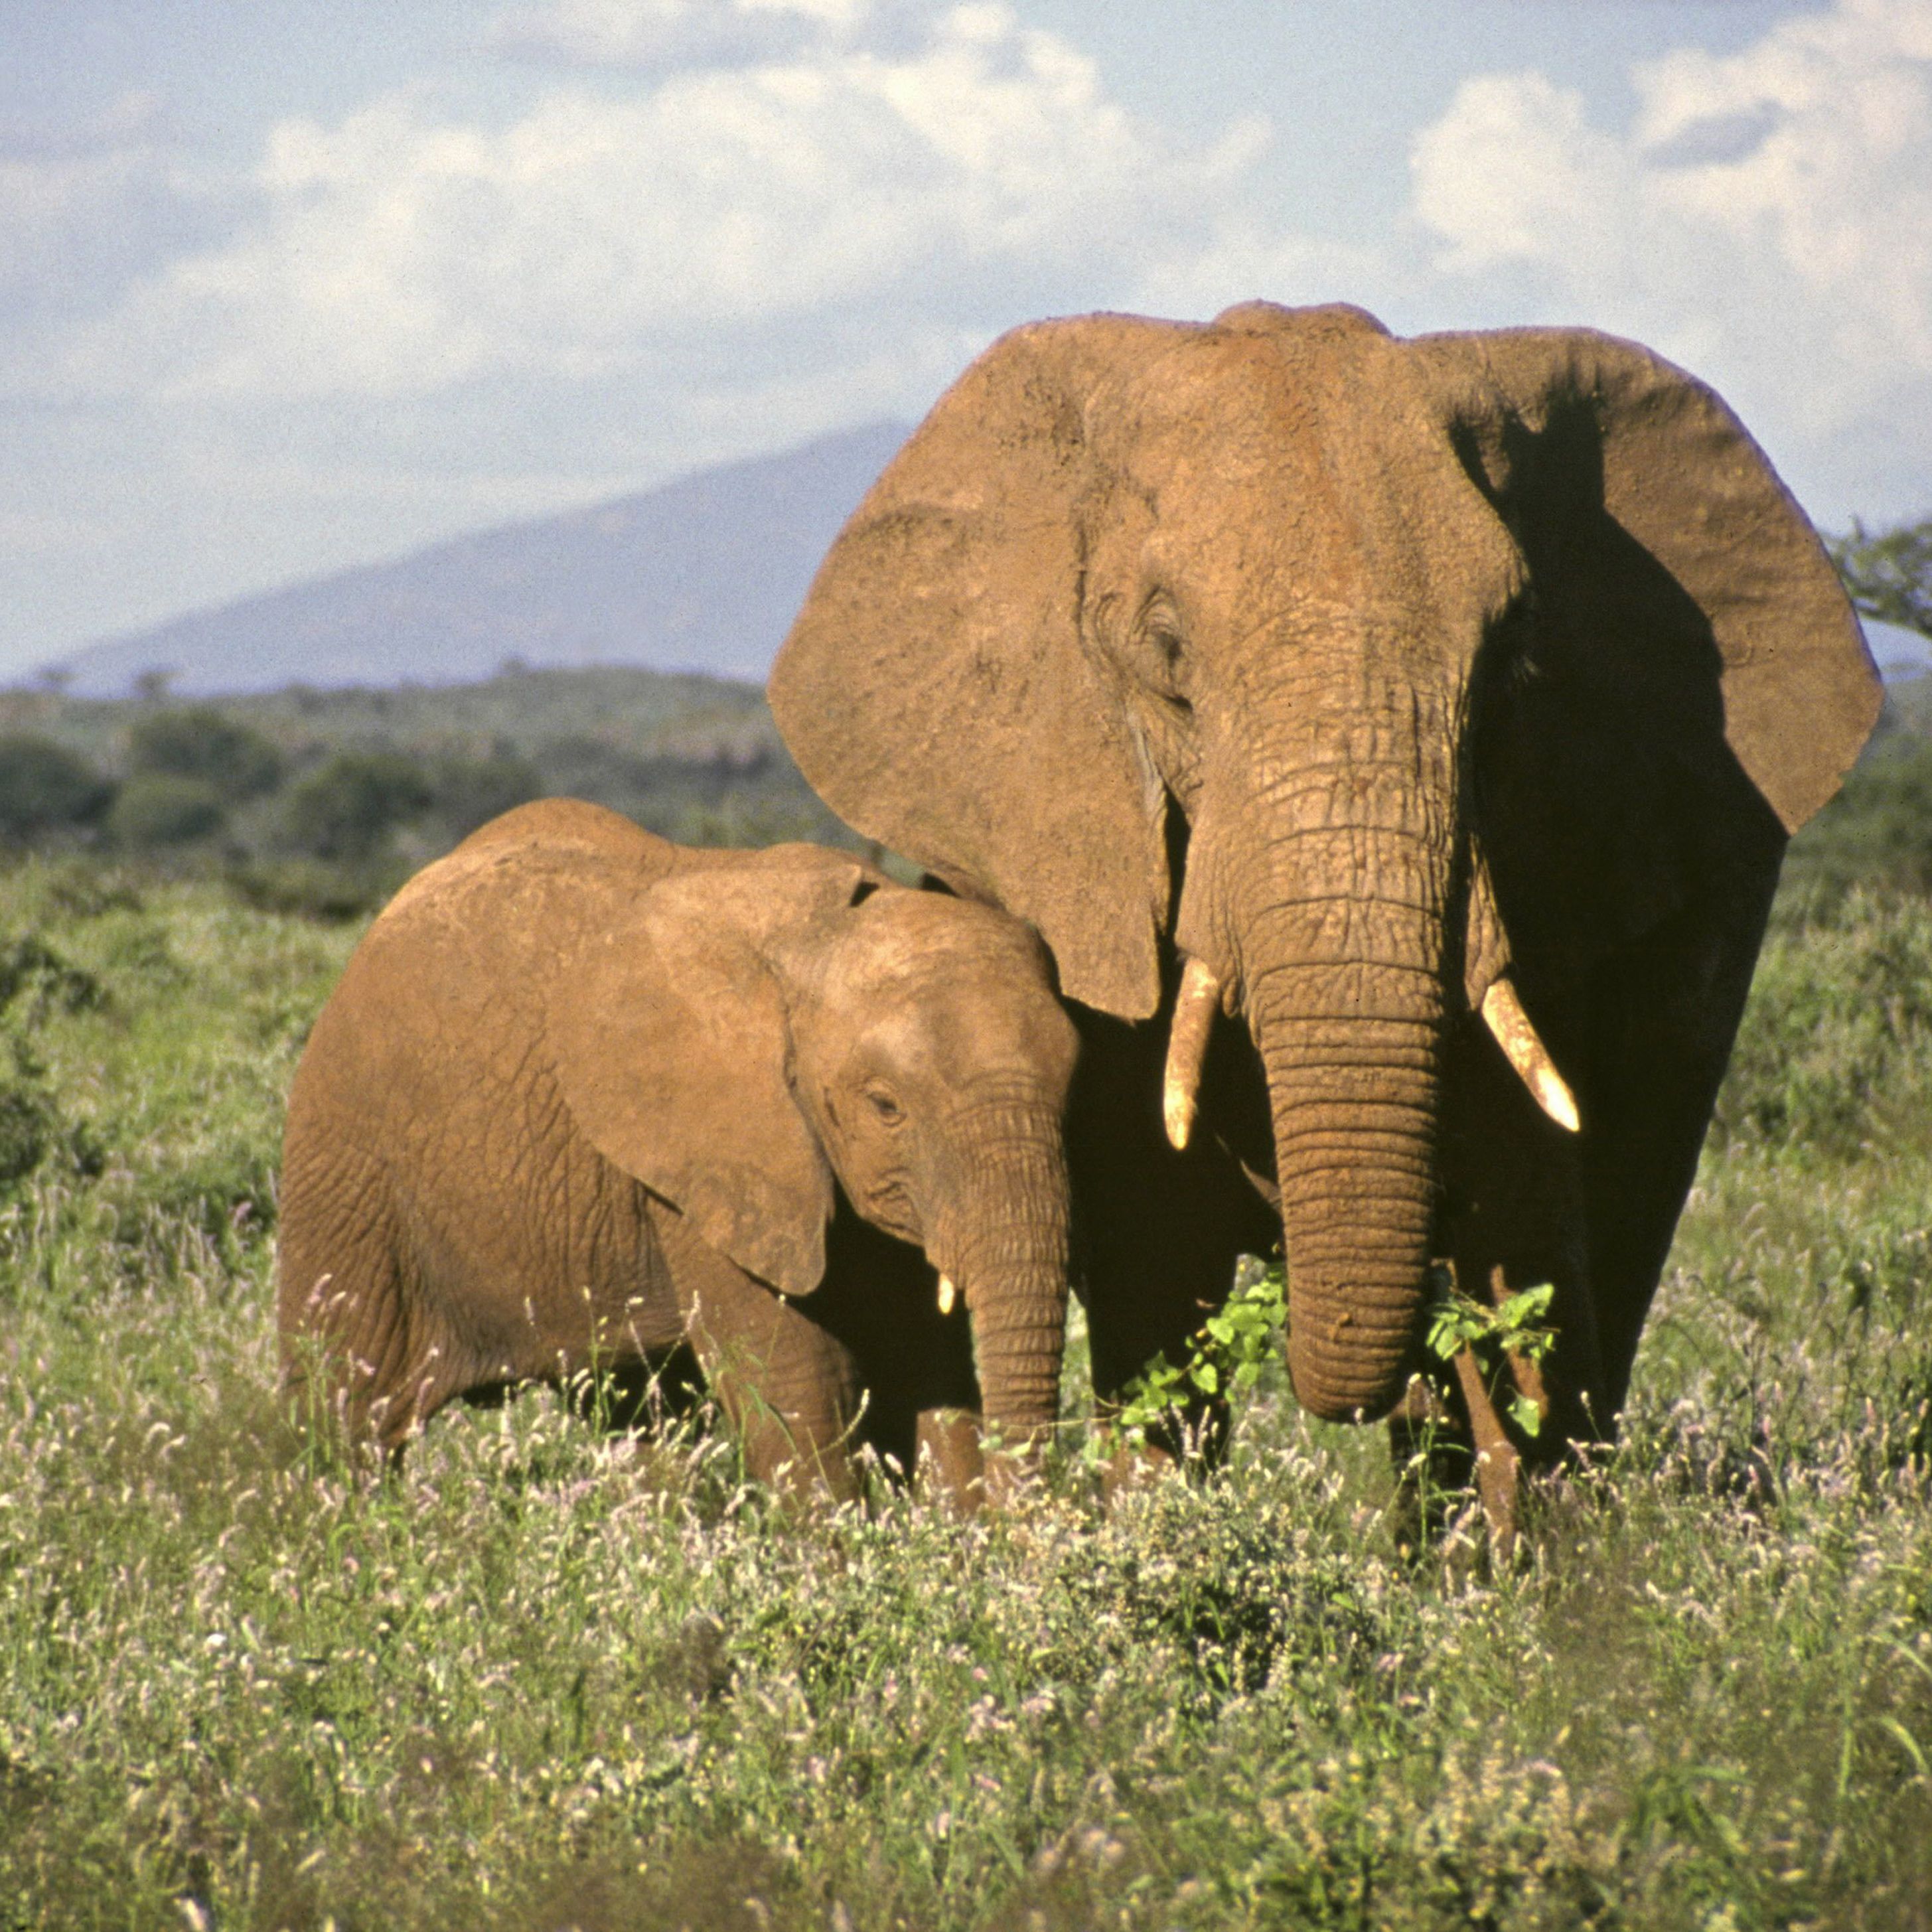 What are the characteristics of a new-born elephant?